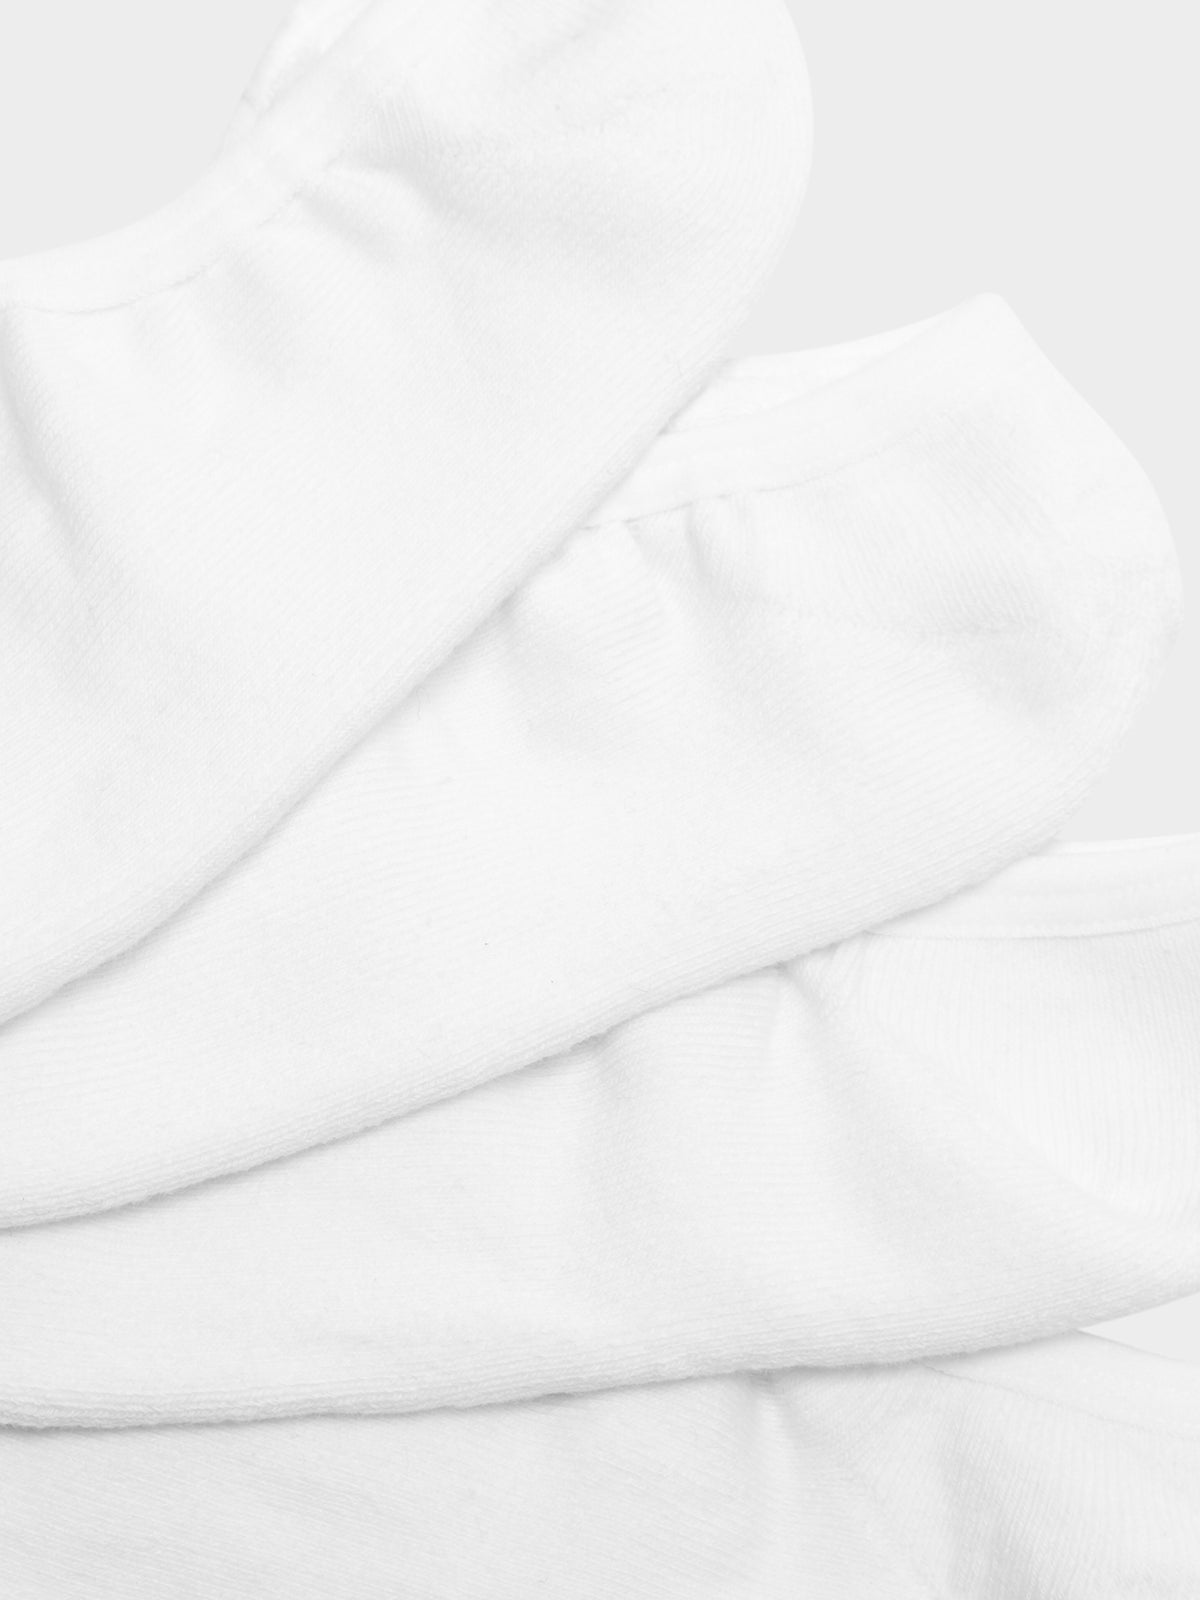 5 Pairs of No-Show Socks in White